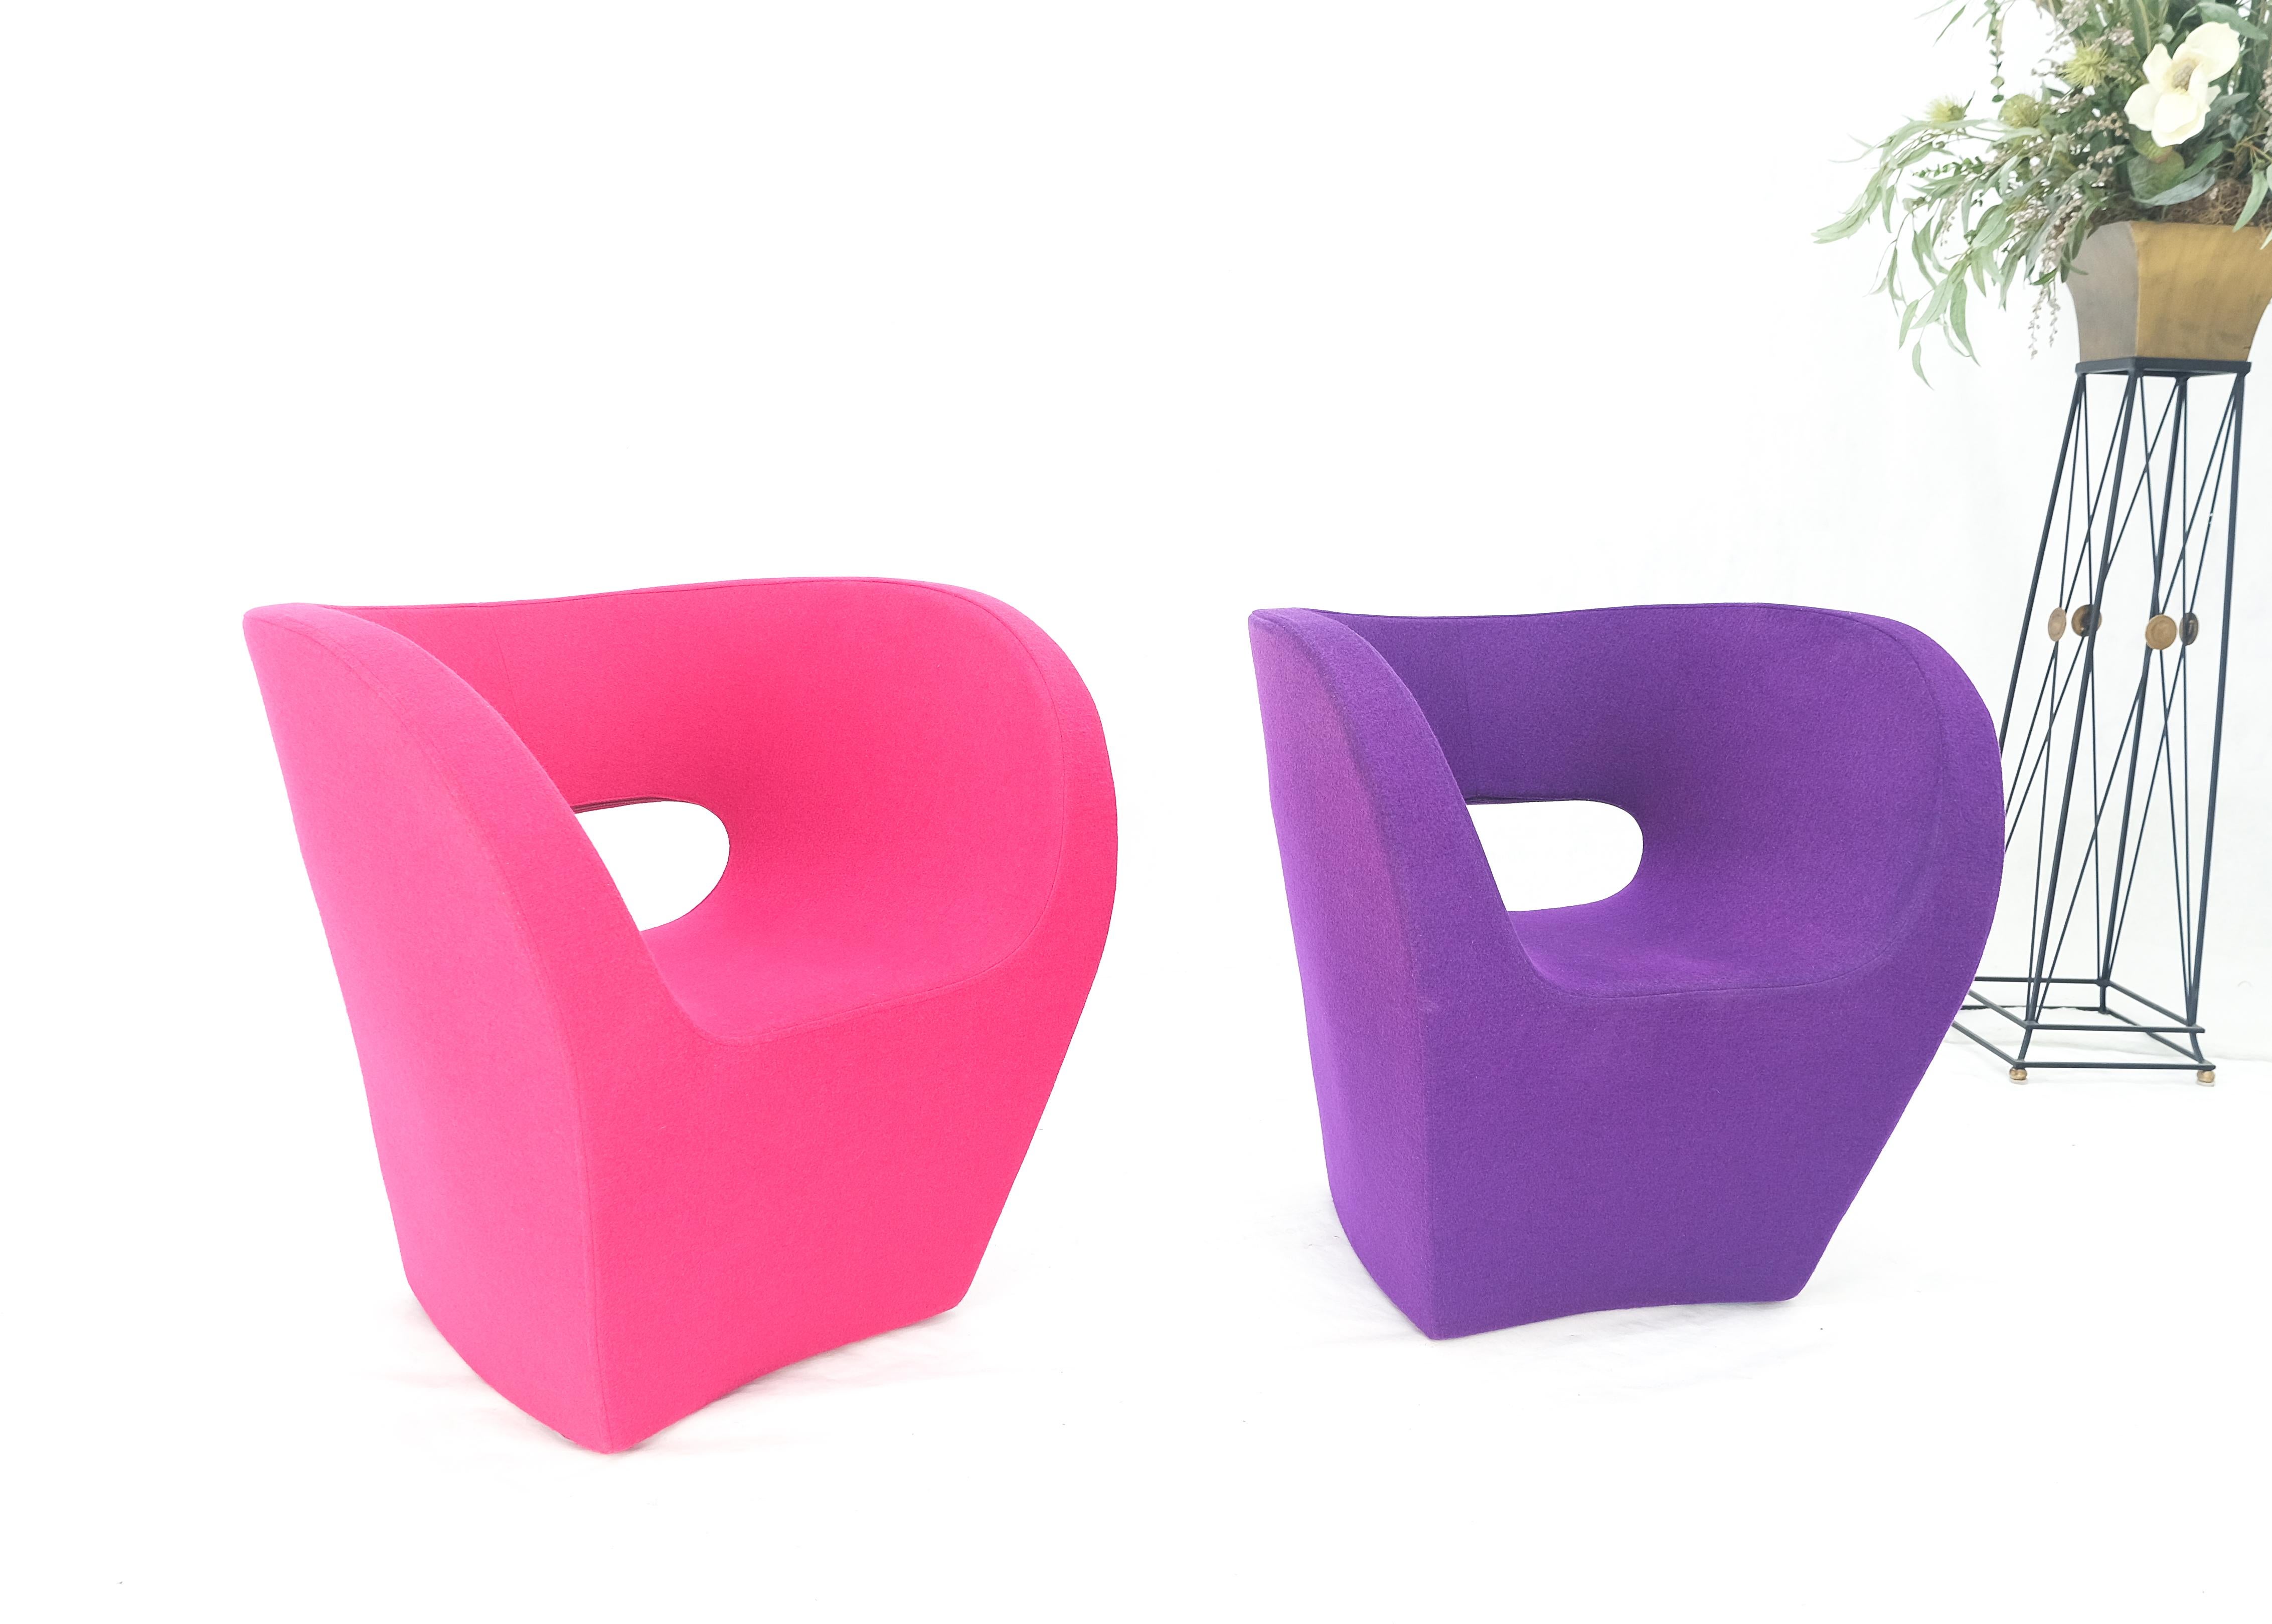 Set 4 Albert Armchair by Ron Arad for Moroso Purple & Red Wool Upholstery MINT! For Sale 12